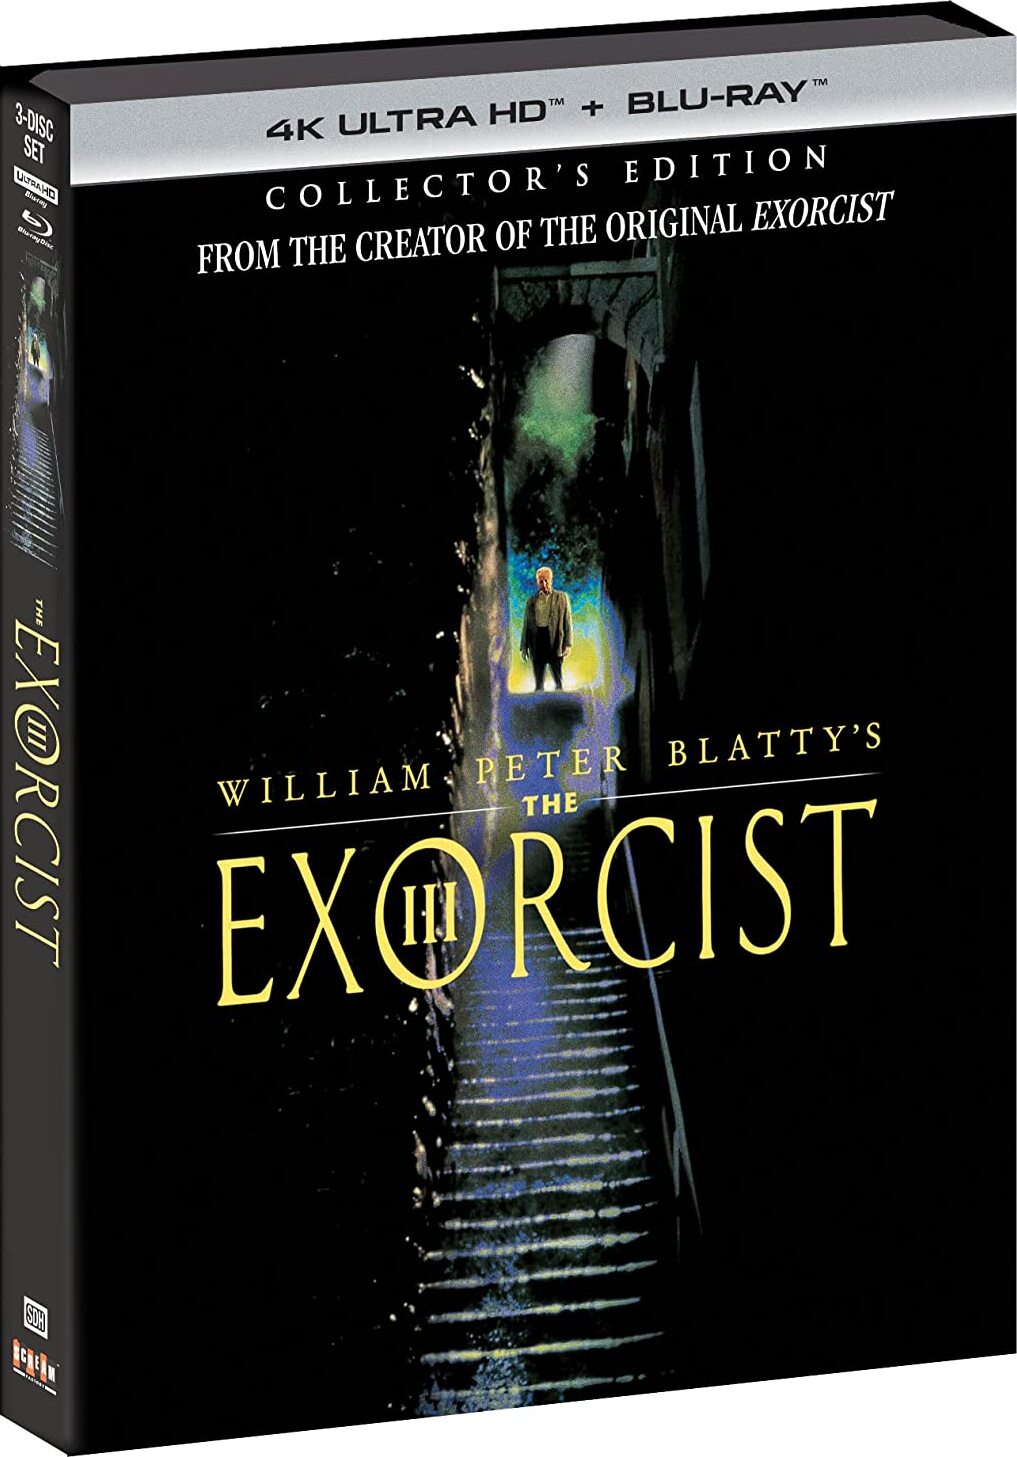 The Exorcist III 4K (1990) de William Peter Blatty - front cover